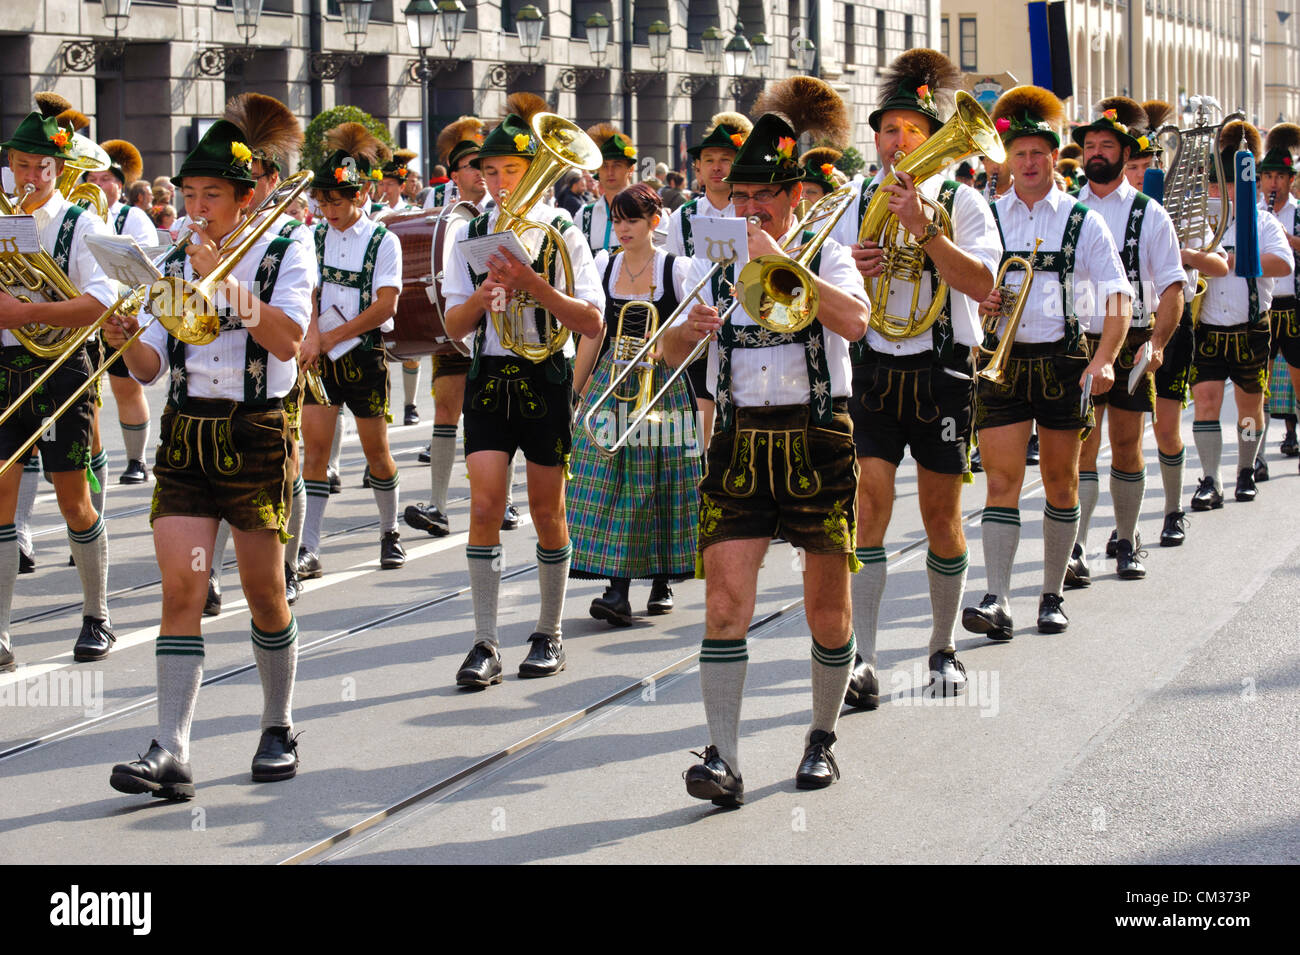 Munich, Germany. 23rd September, 2012. The opening parade of the world's biggest beer-festival, Oktoberfest, proceeds through the city of Munich, Germany. The music brass band of Burgberg, in traditional bavarian clothes, was part of 8900 participants of this public parade. Stock Photo